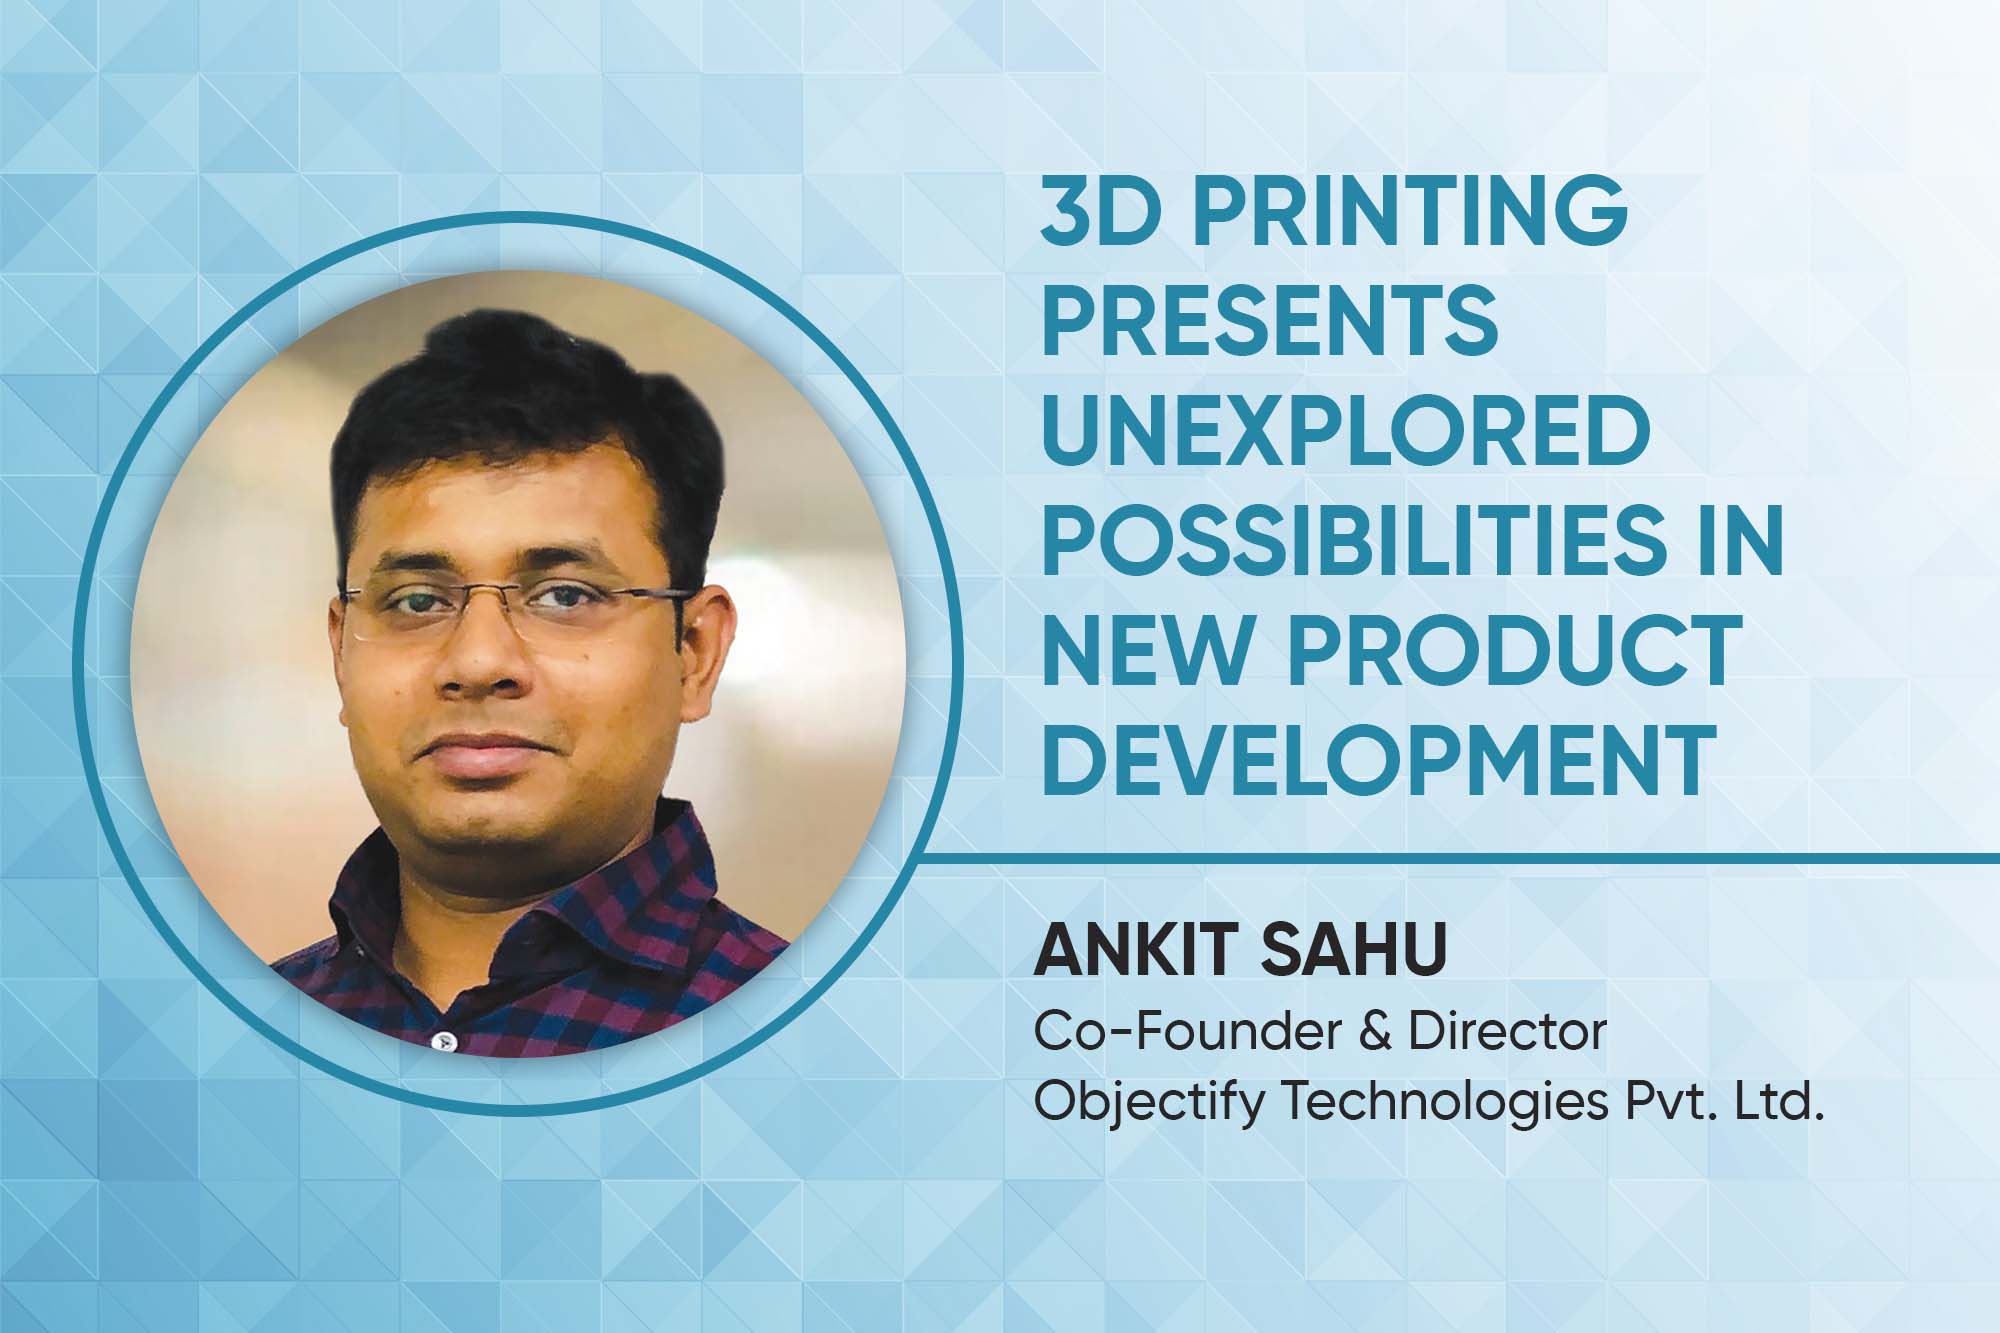 3D printing presents unexplored possibilities in new product development